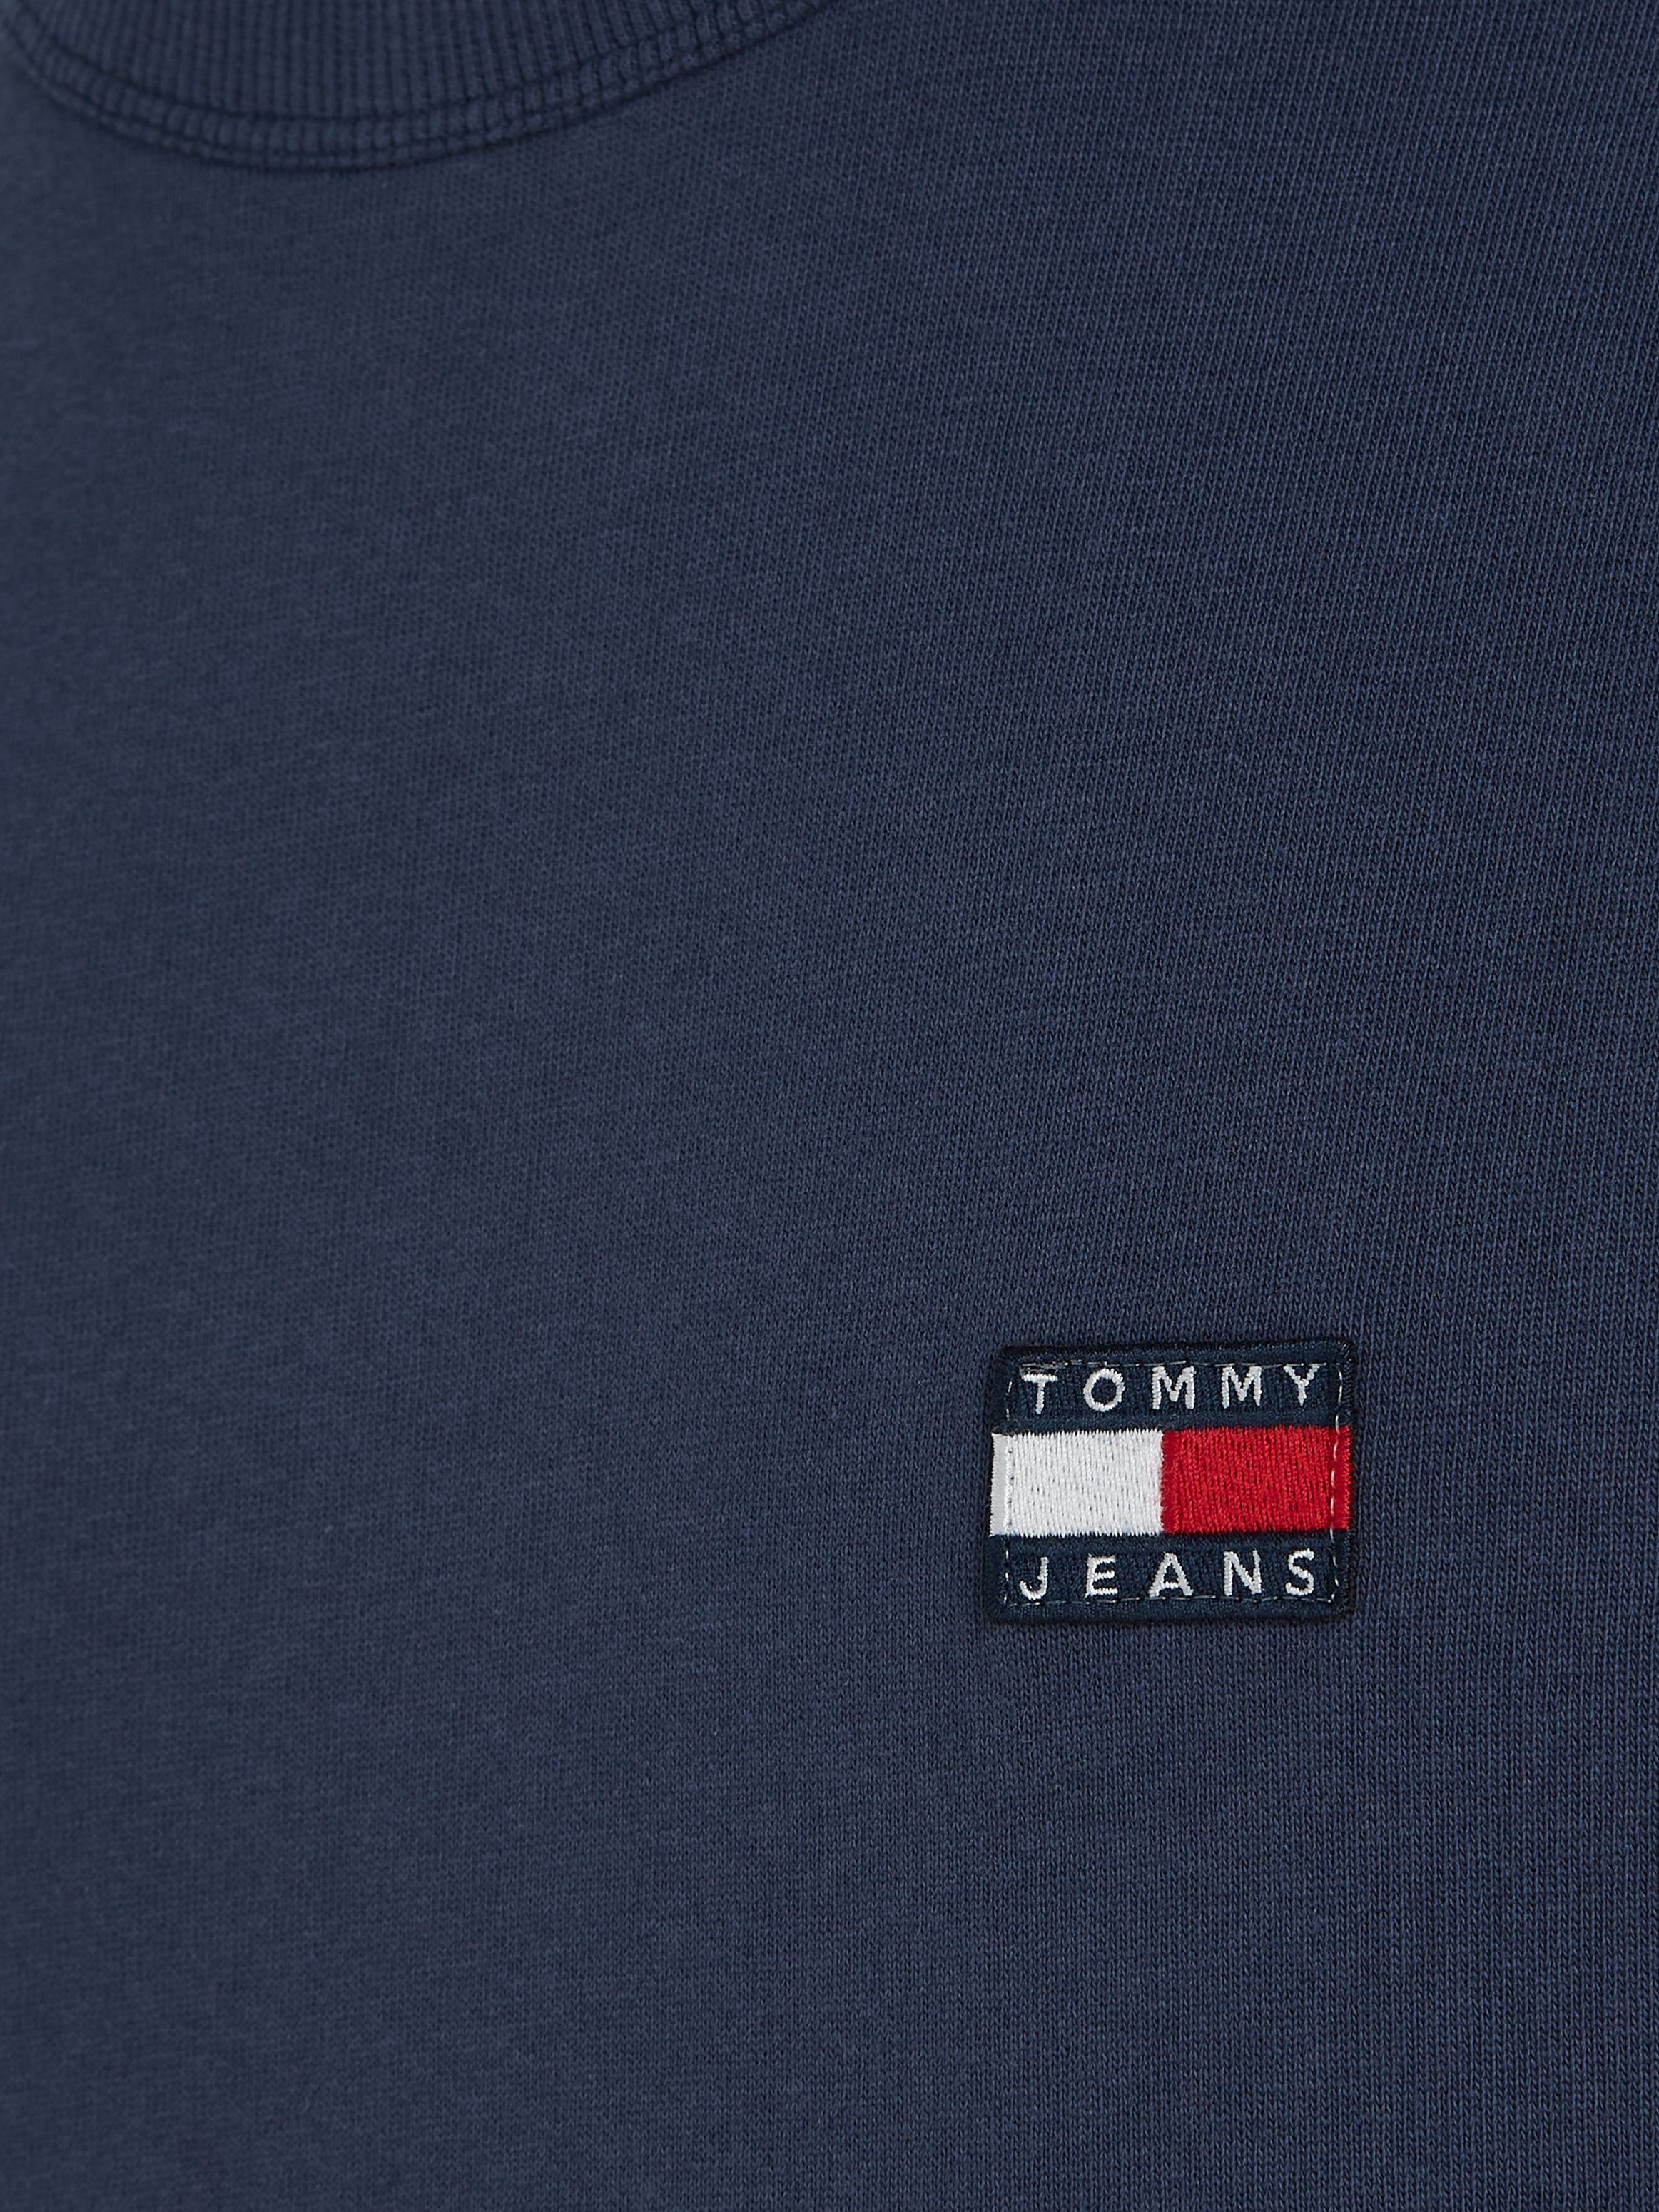 CLSC Jeans Tommy TOMMY XS Navy Twilight BADGE TEE T-Shirt TJM